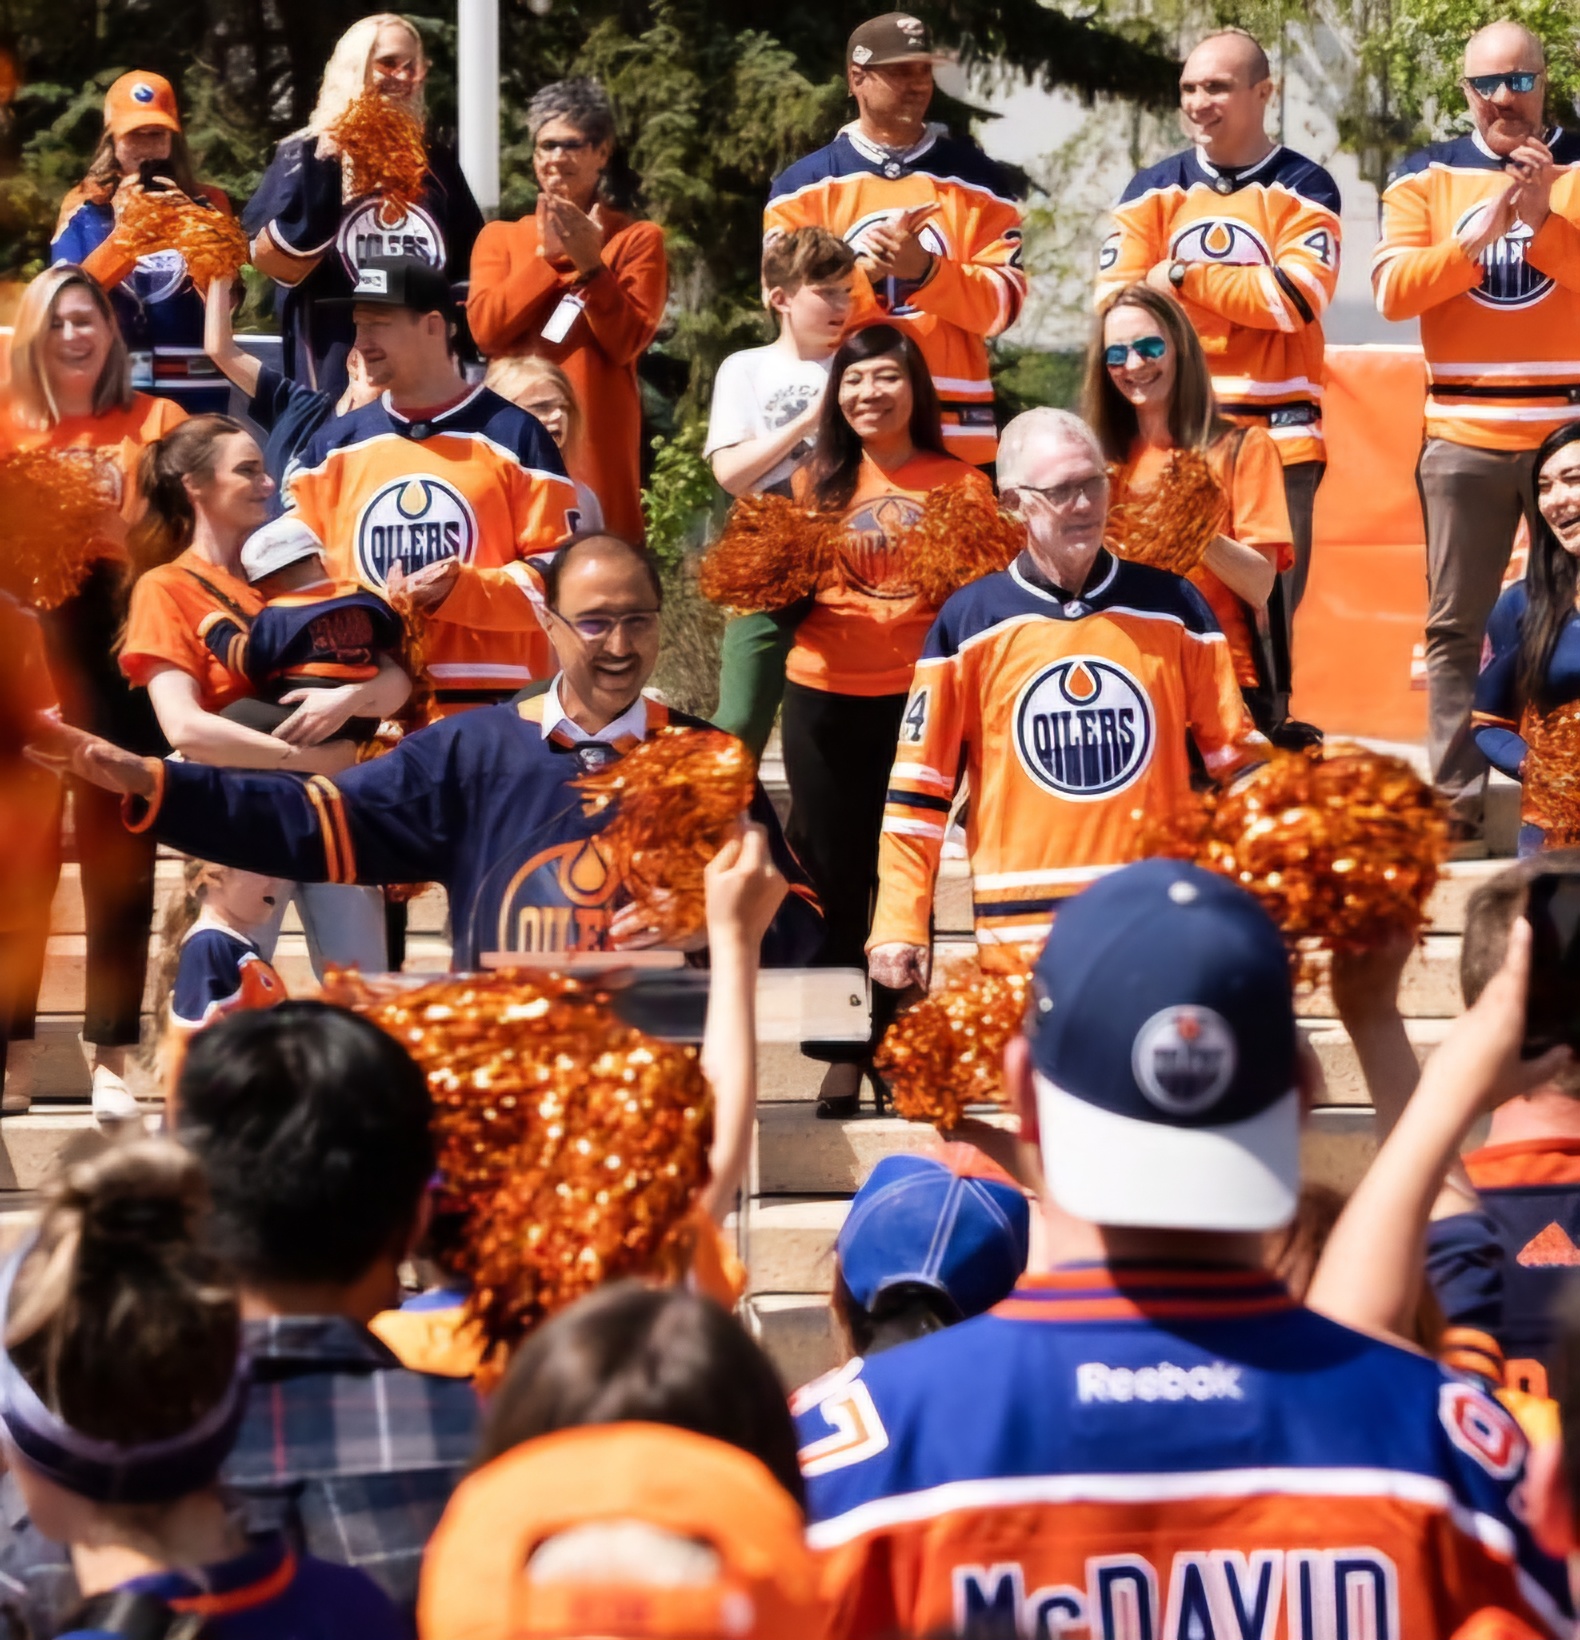 There’s a friendly wager between the mayors of Edmonton and Sunrise, Florida, ahead of the Stanley Cup Final